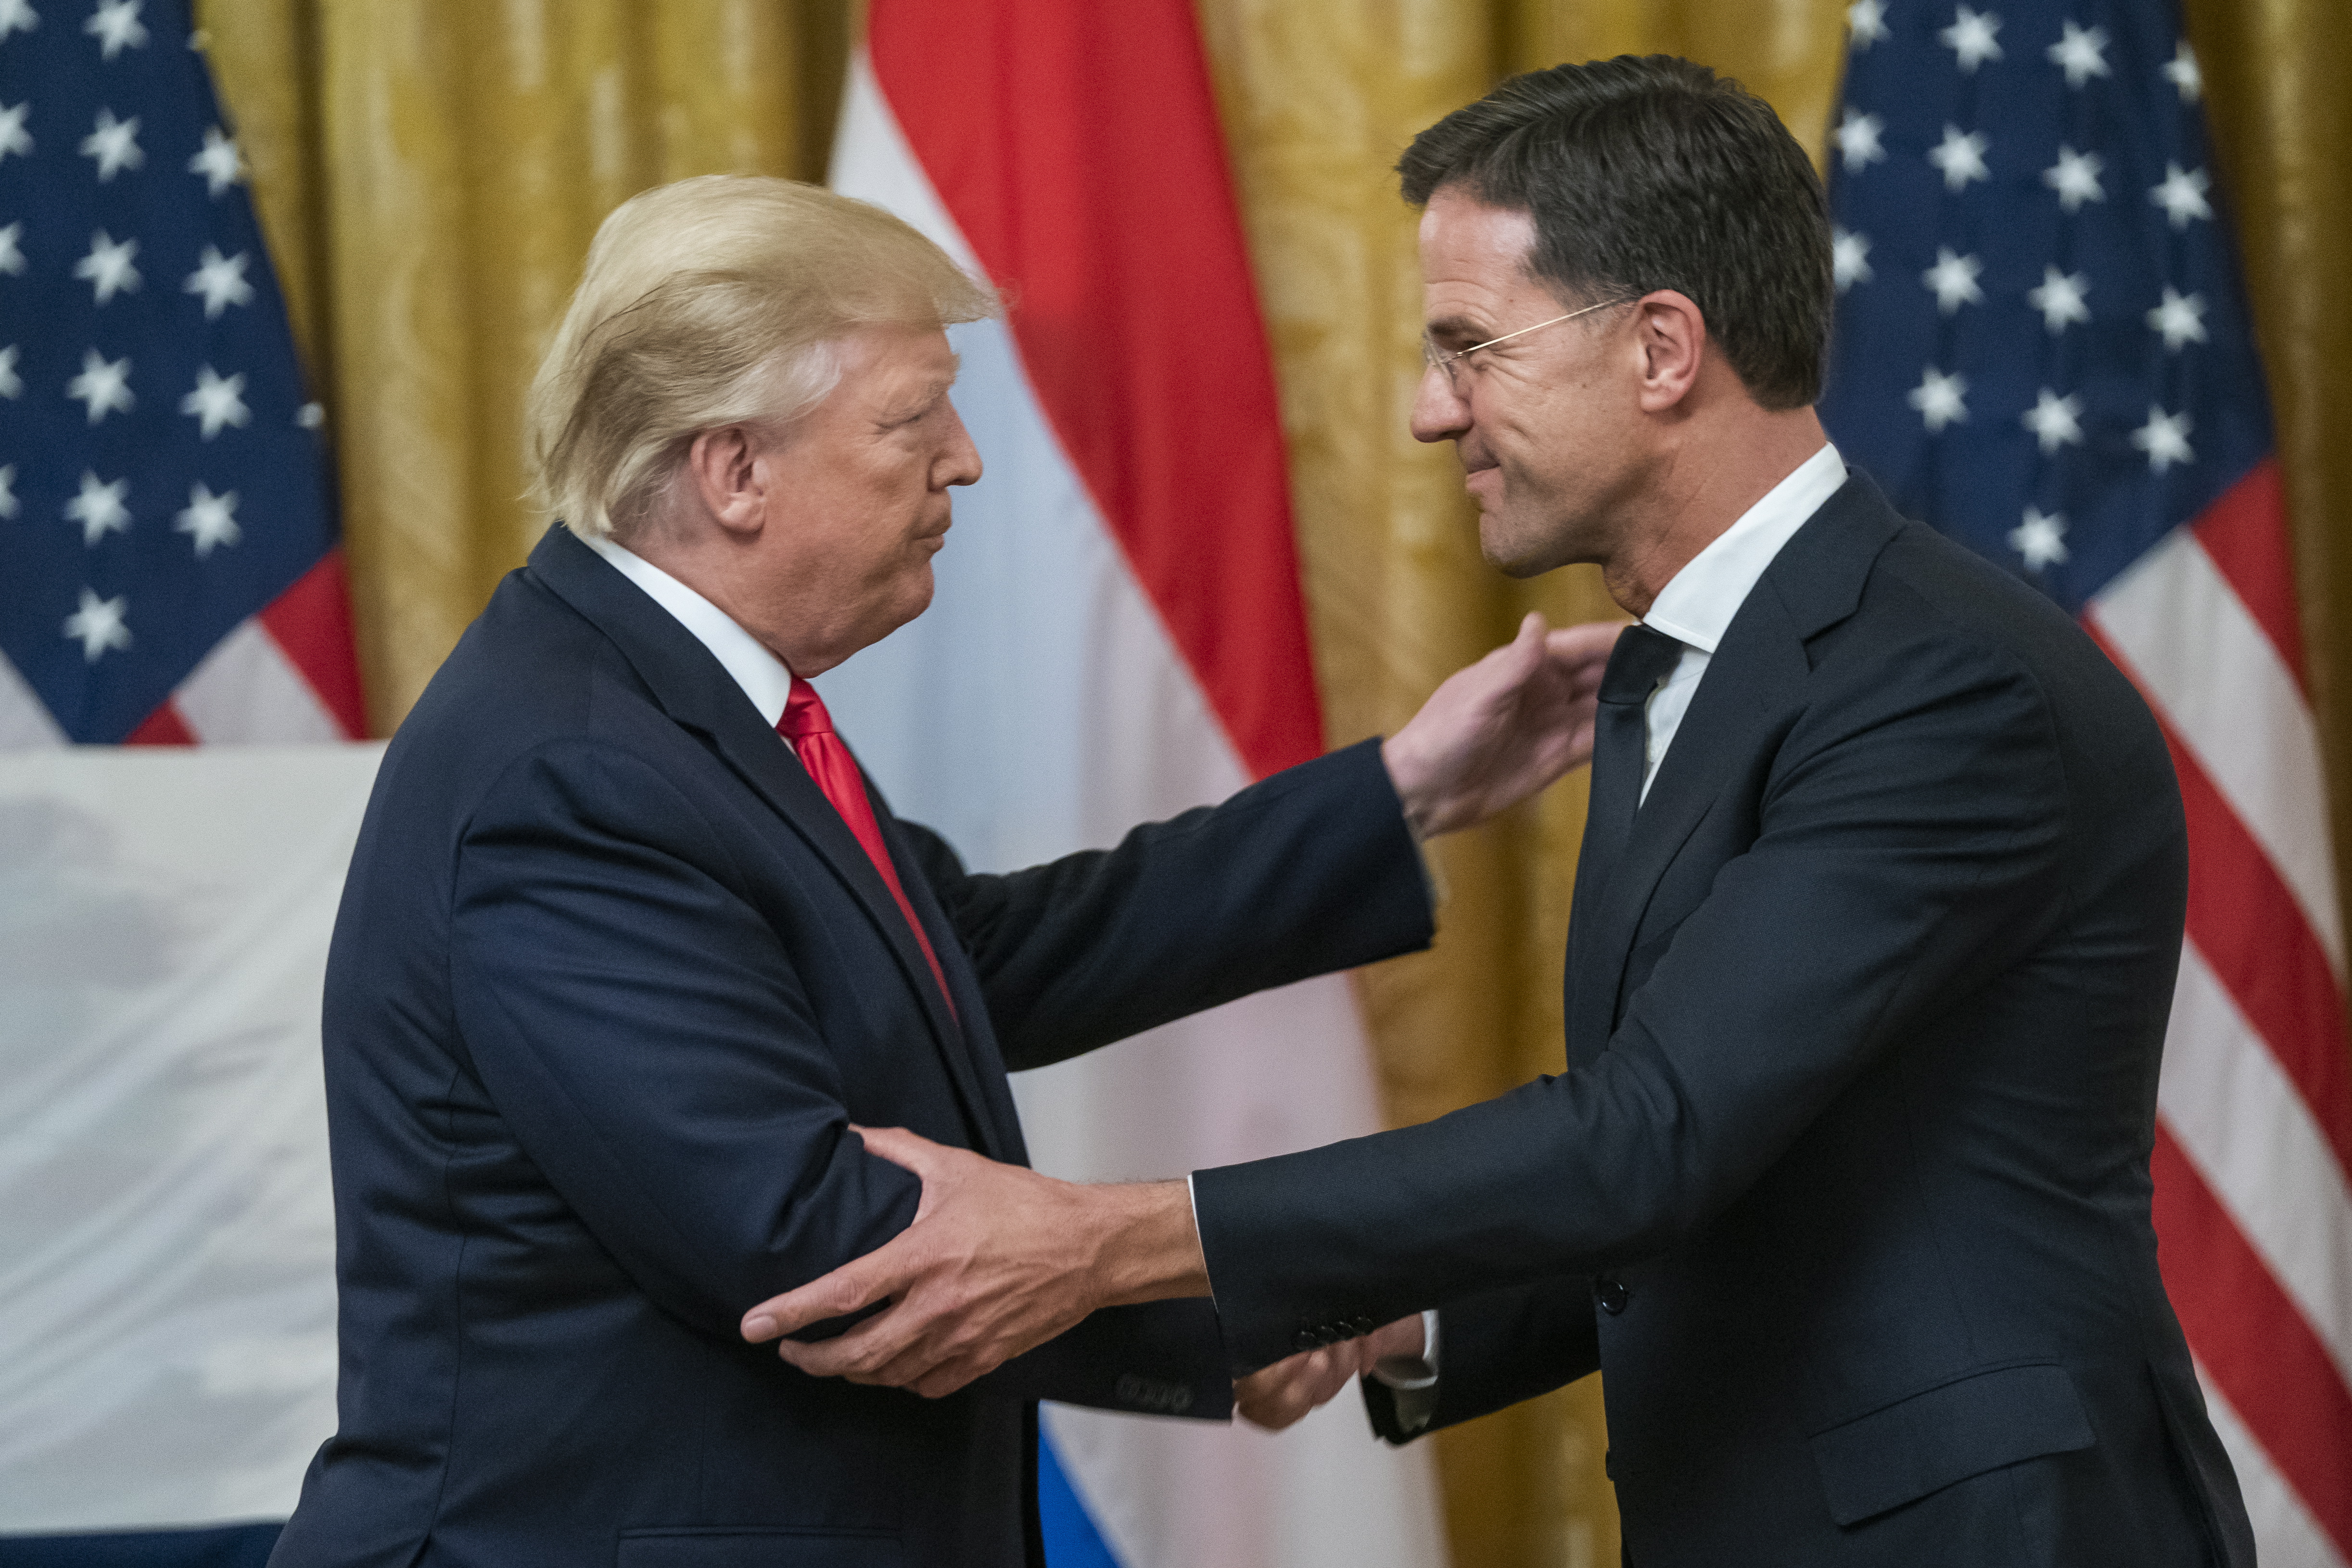 2019-07-18 15:16:29 epa07725603 US President Donald J. Trump (L) shakes hands with Prime Minister of the Netherlands Mark Rutte (R) after accepting a Dutch-owned American flag that flew on a Navy ship on D-Day in the East Room of the White House in Washington, DC, USA, 18 July 2019. Dutch collector Bert Kreu bought the flag and gifted it to the Smithsonian Museum.  EPA/JIM LO SCALZO